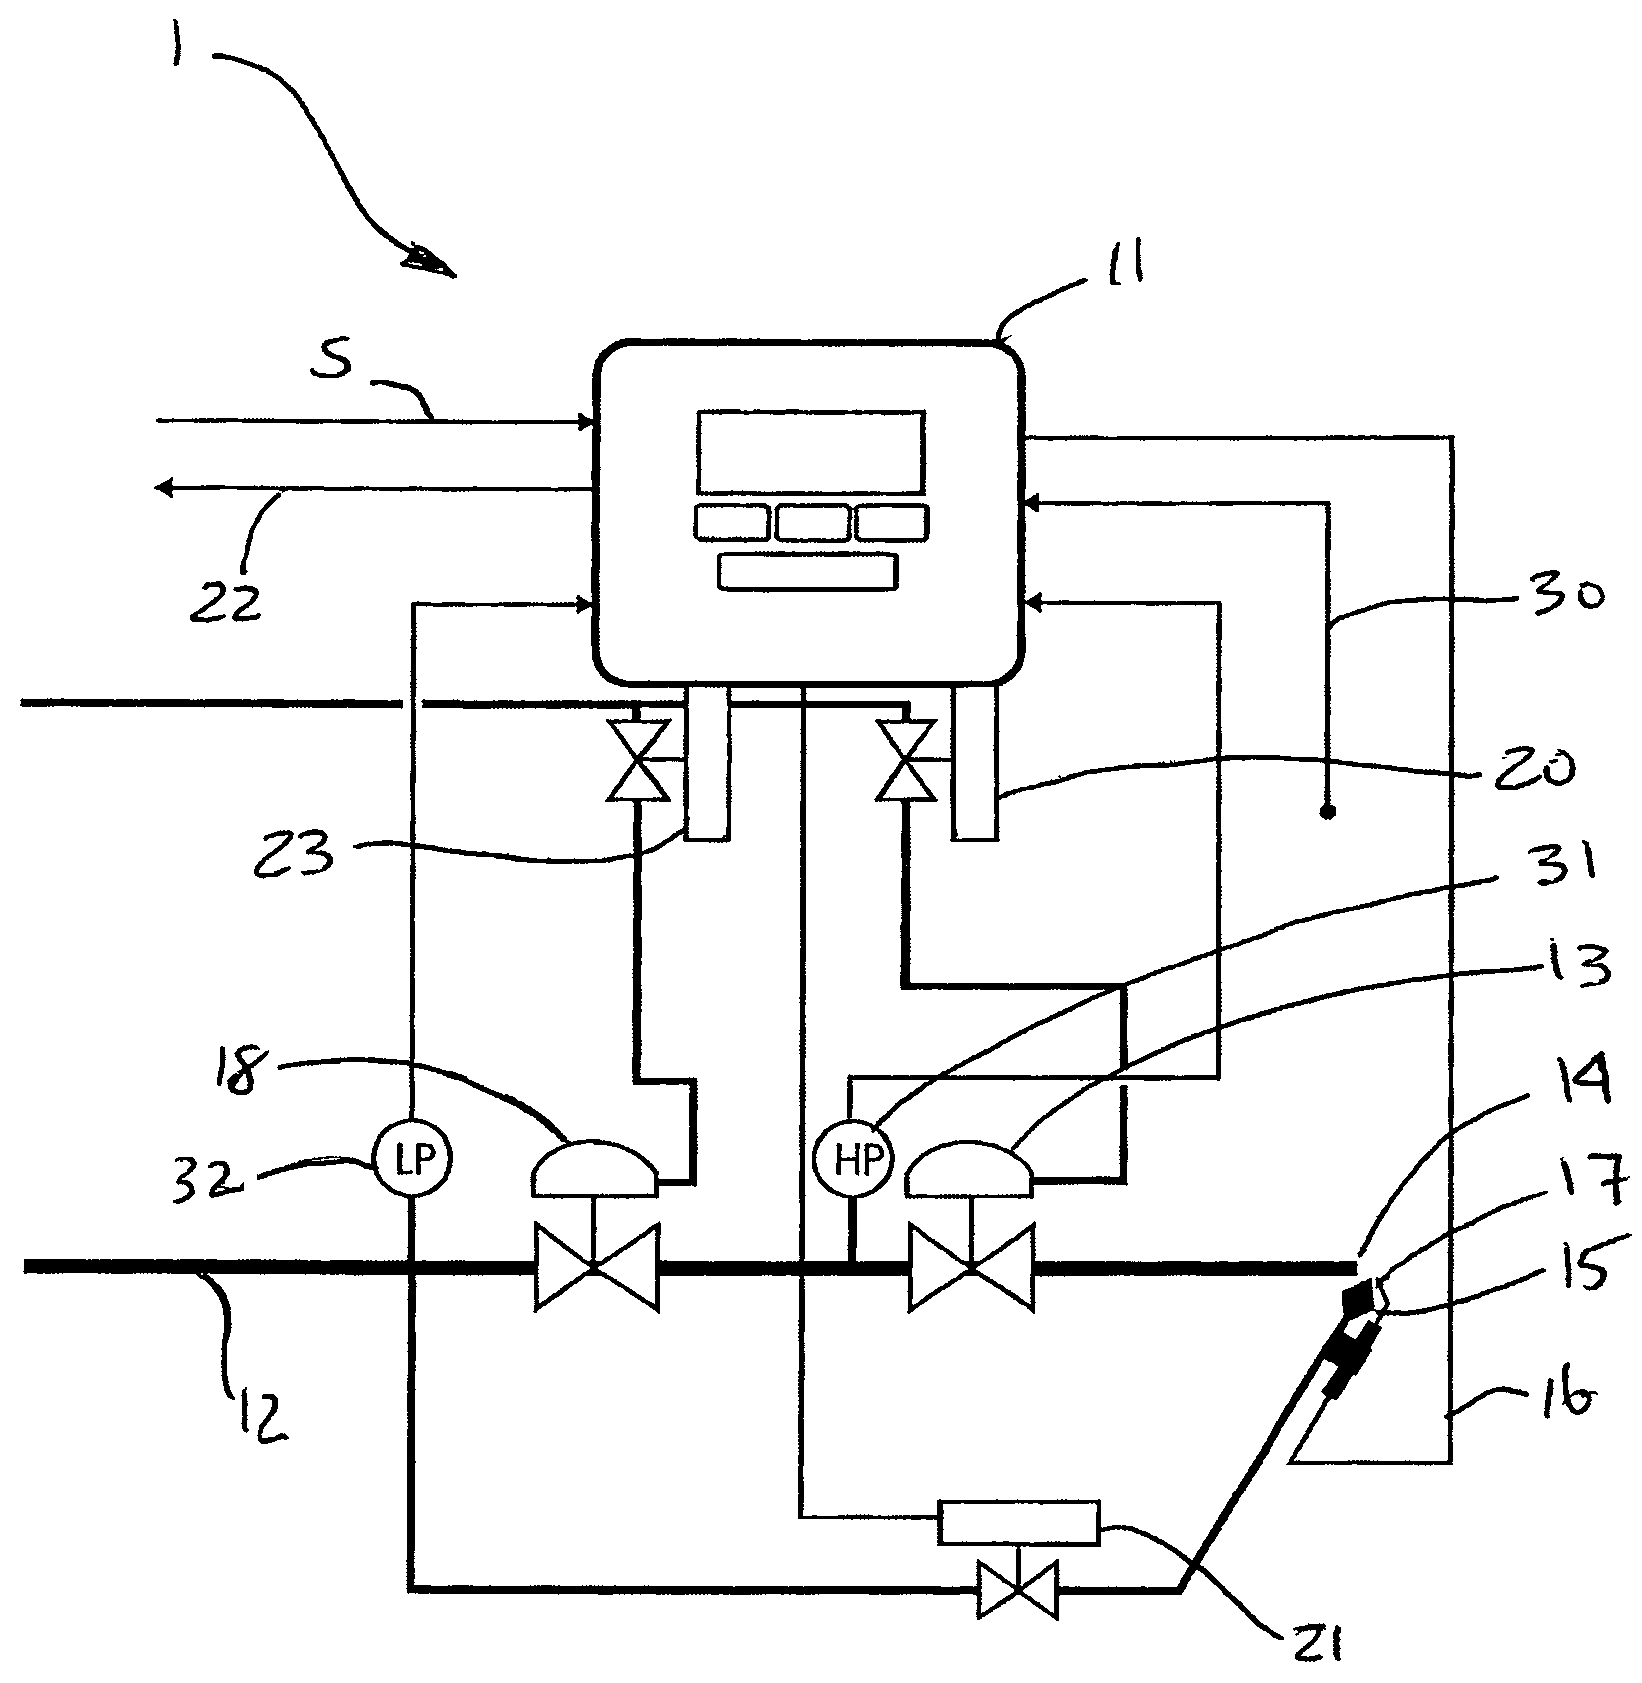 Burner ignition and control system